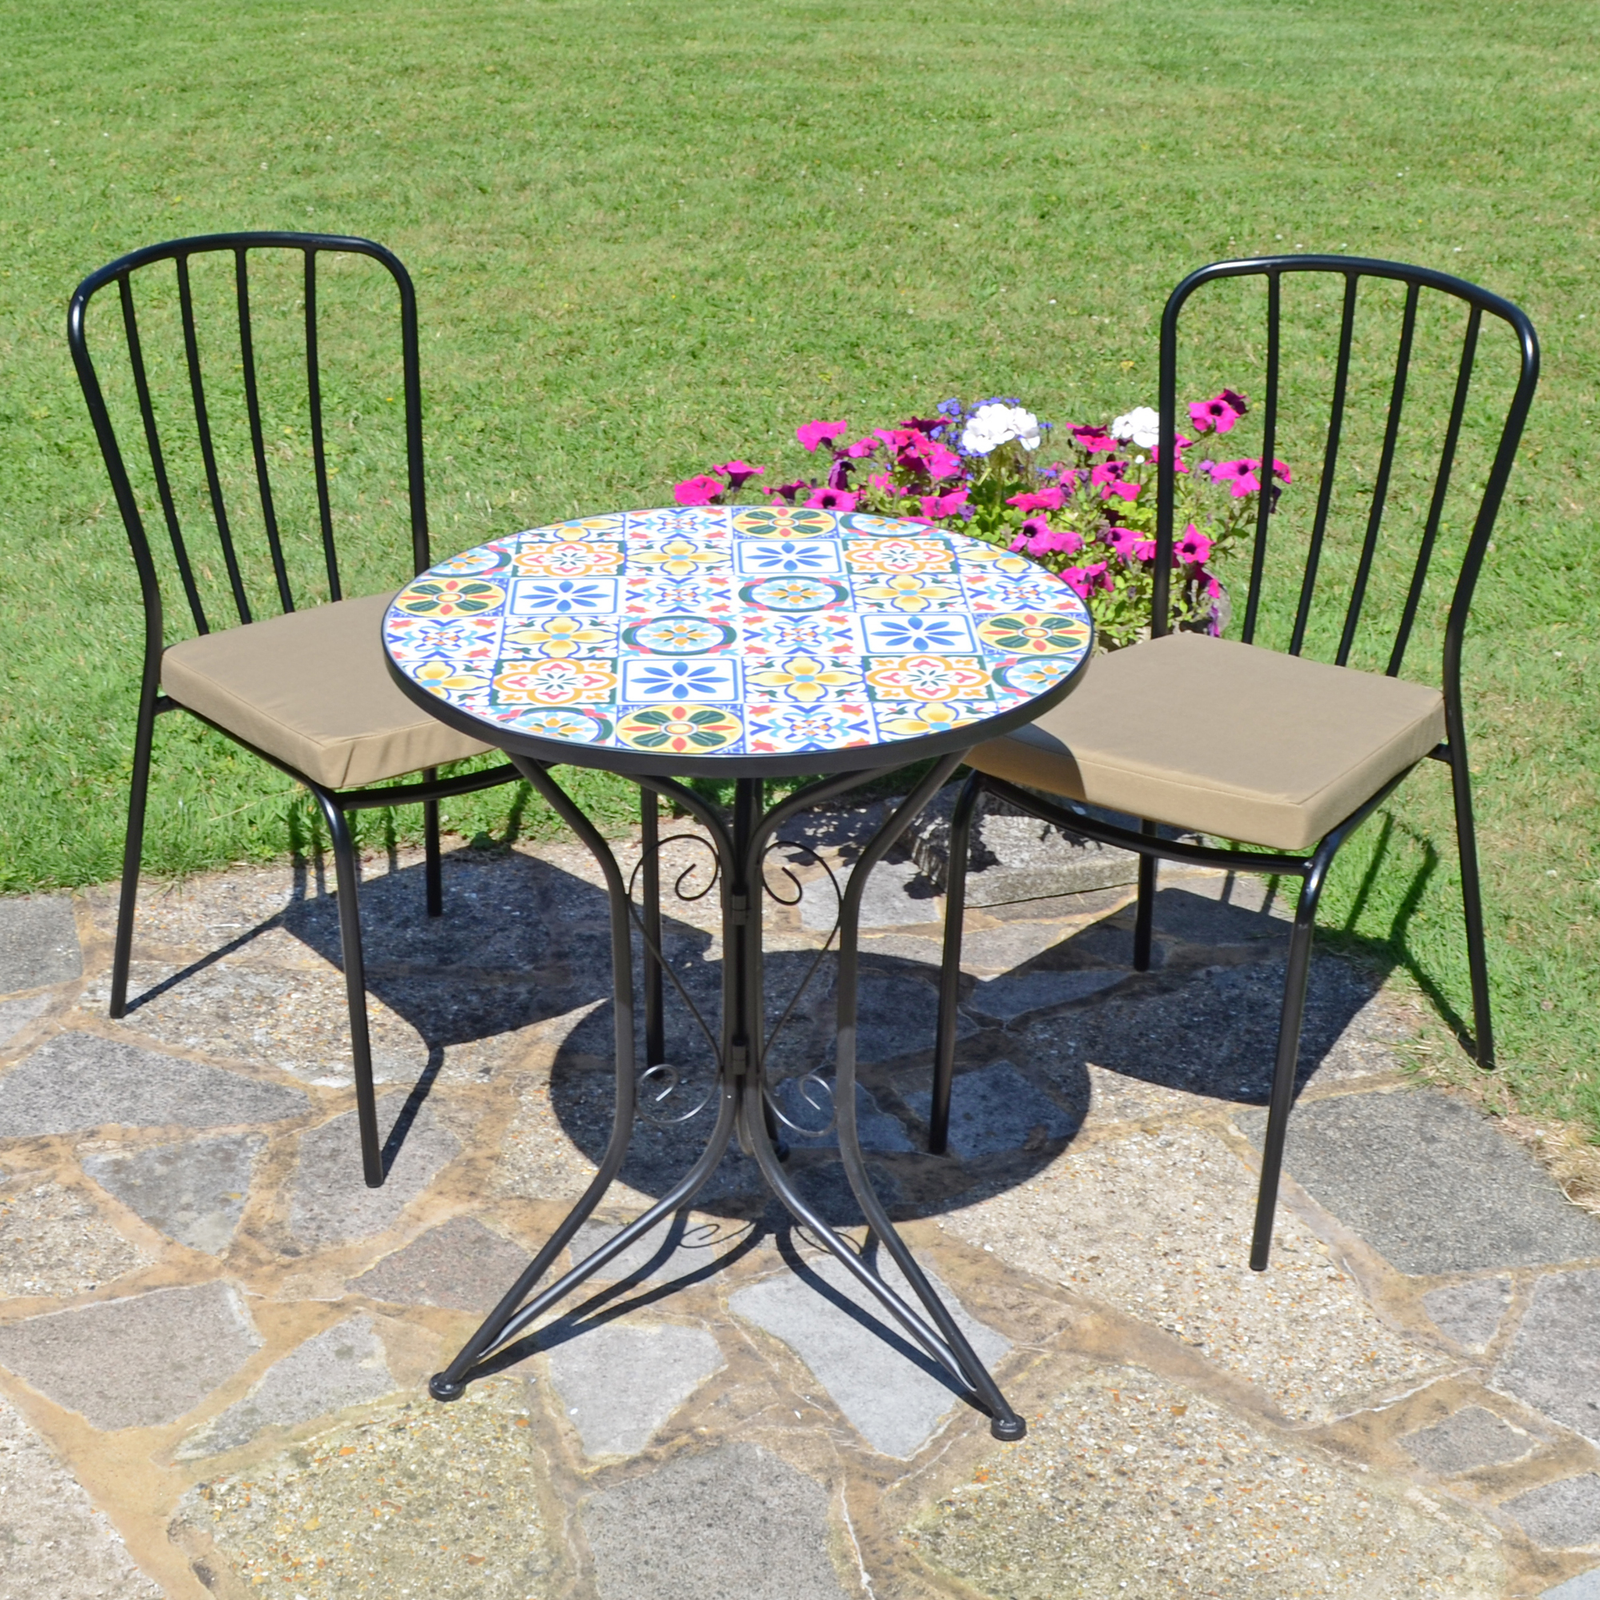 Summer Terrace Cuba Round Table with 2 Milan Chairs Garden Dining Set Dining Sets Summer Terrace   